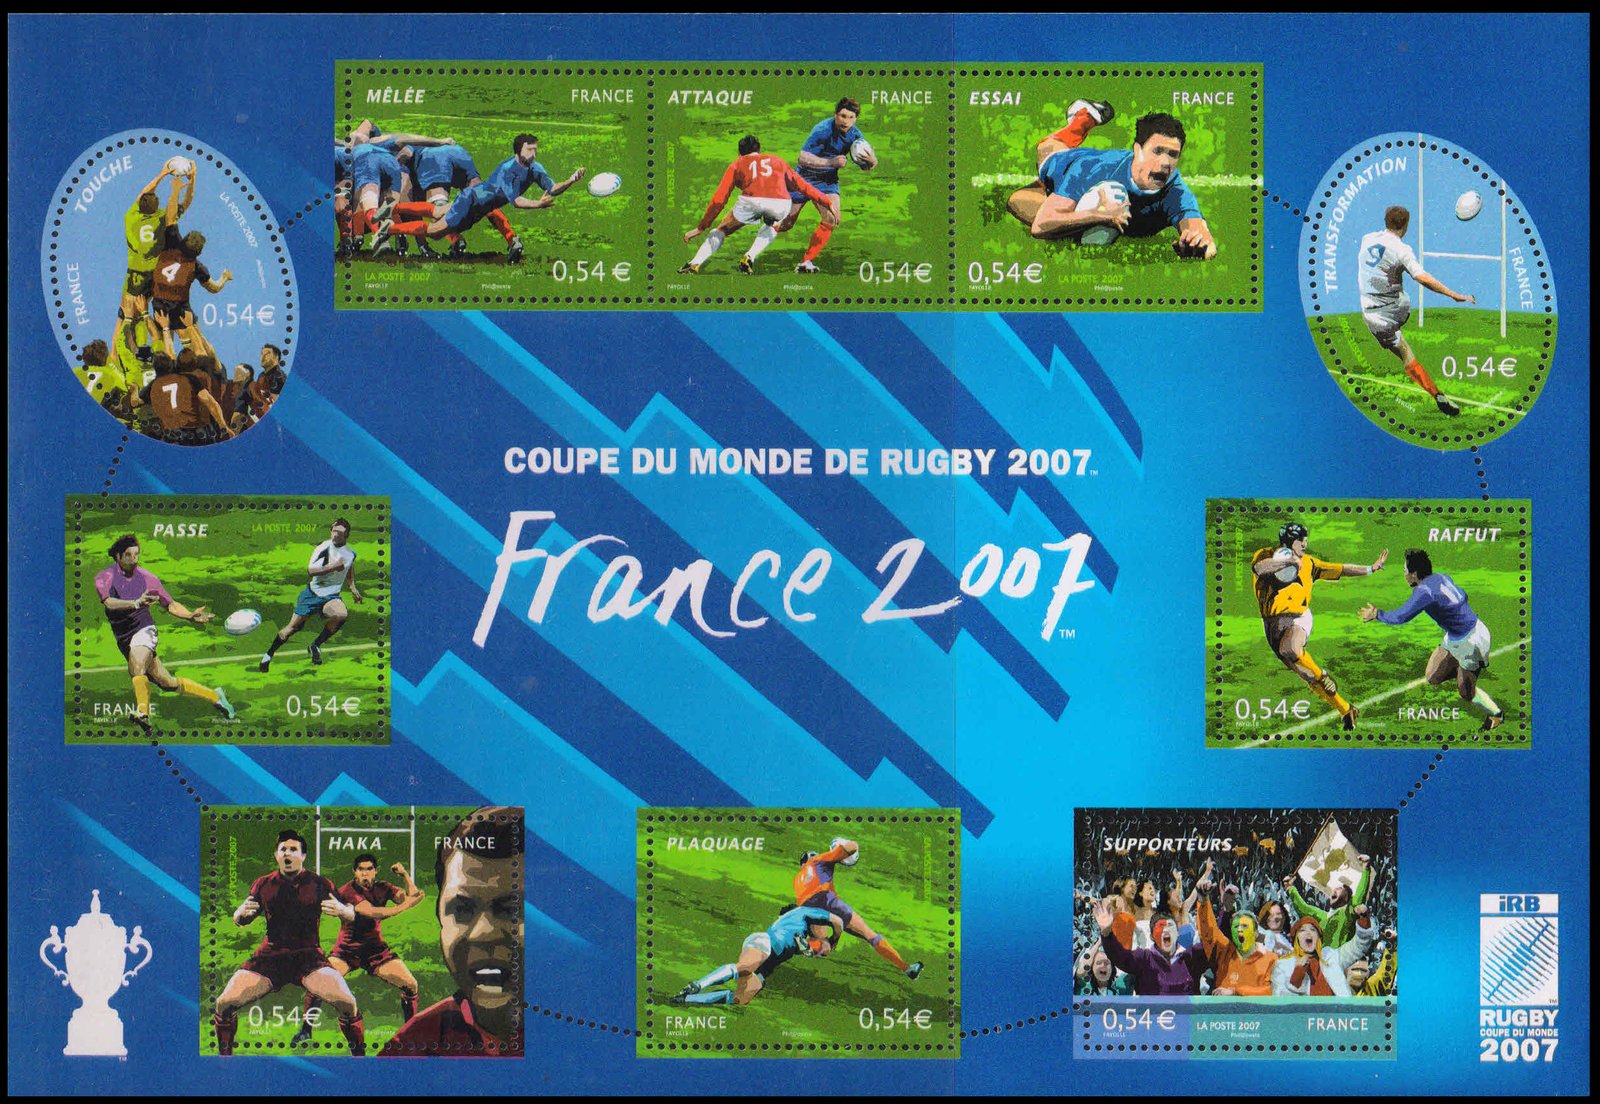 FRANCE 2007-Rugby World Cup Championship-Odd Shaped-Sheet-let of 10 MNH, S.G. MS 4310-Cat £ 31